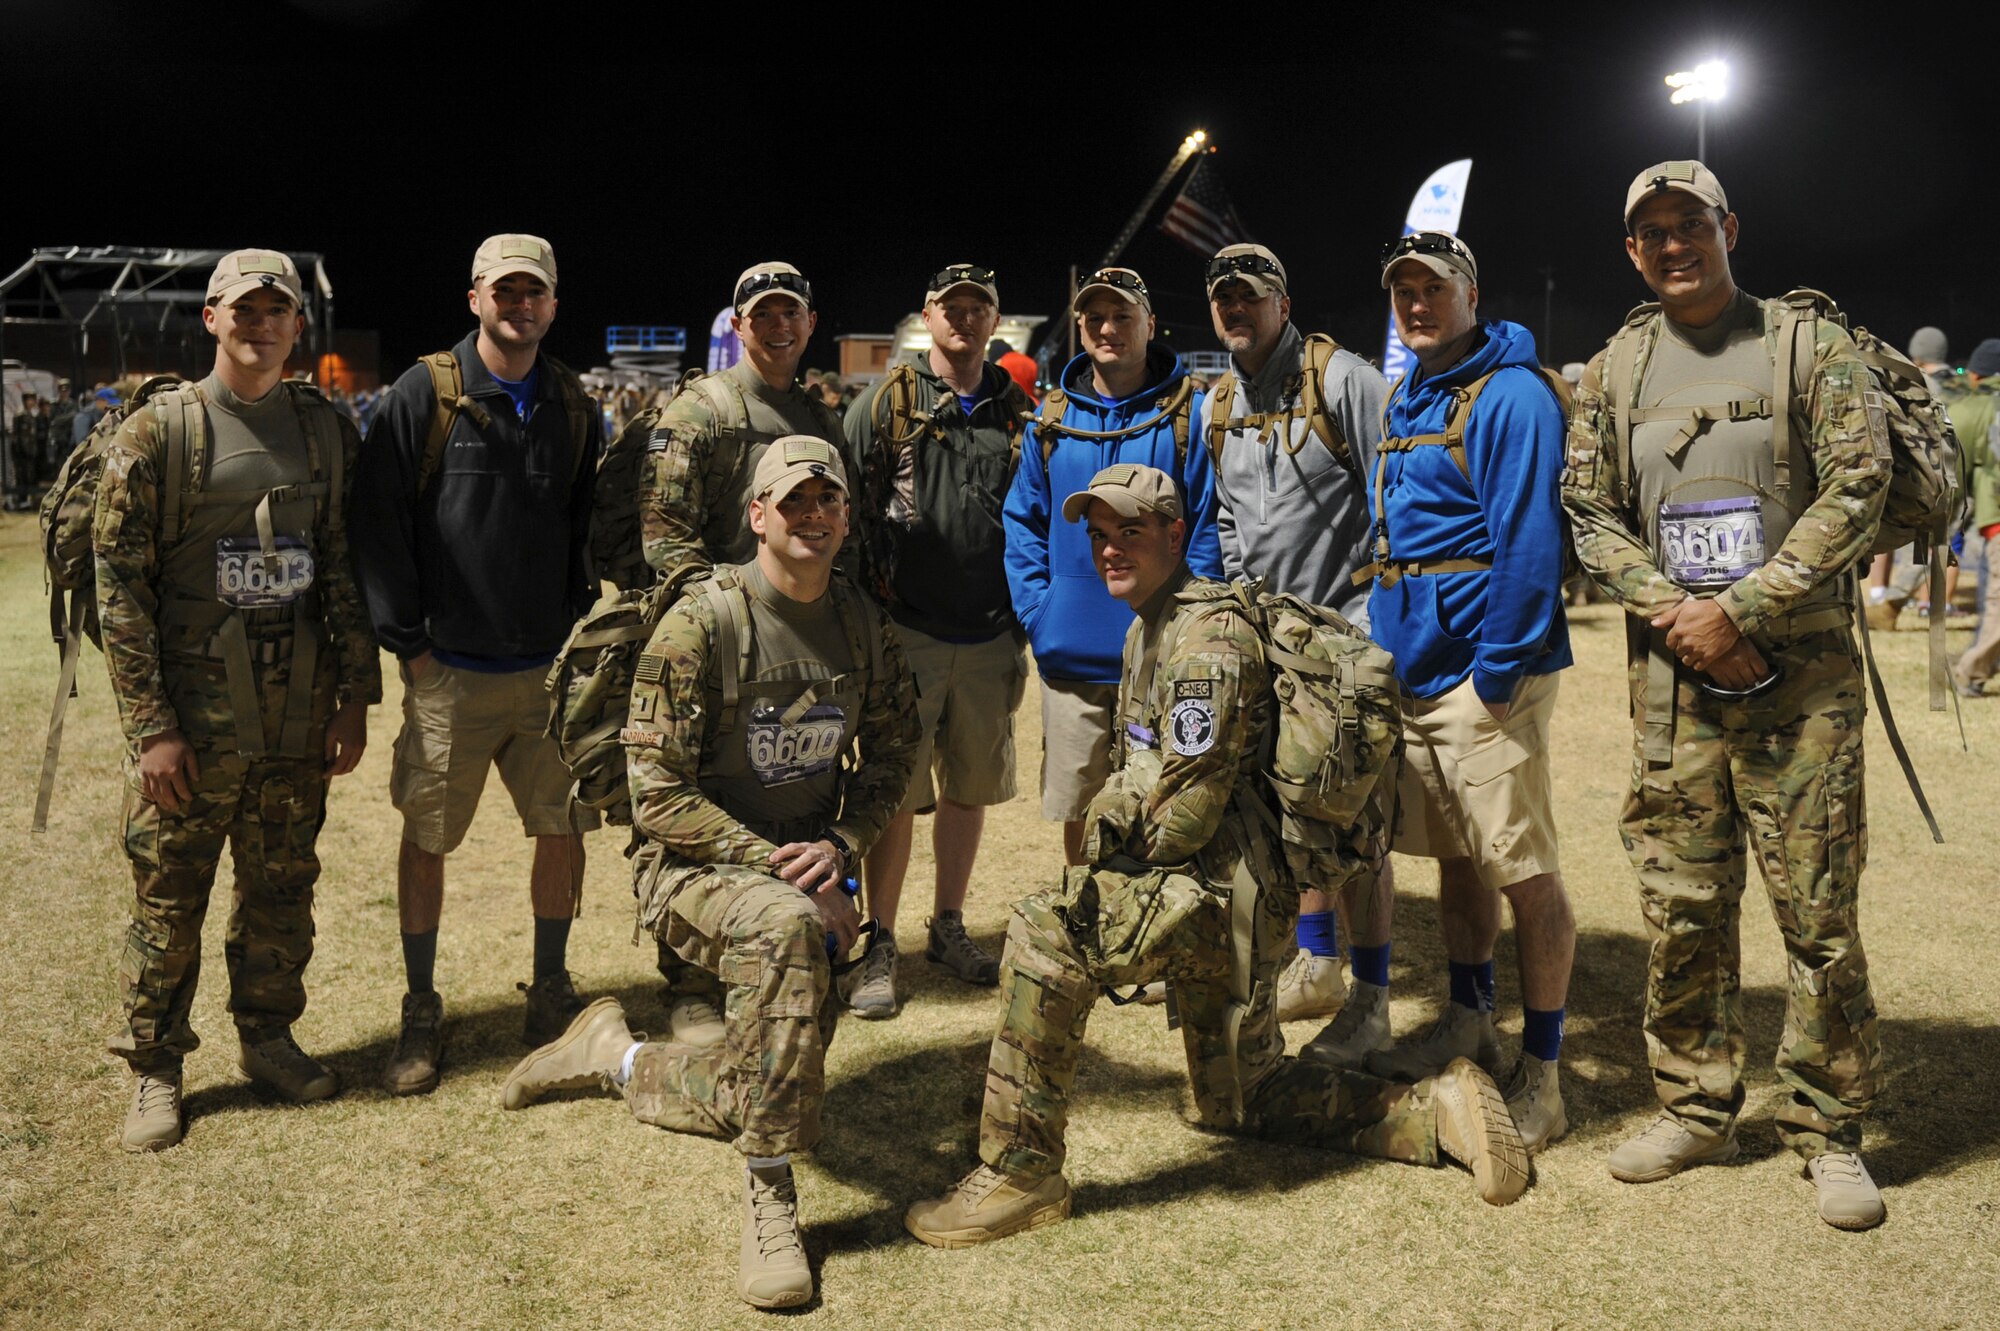 U.S. Airmen assigned to Little Rock Air Force Base, Ark., pose for a photo in the early morning prior to the start of the 2016 Bataan Memorial Death March at White Sands Missile Range, N.M., March 20, 2016. The two teams from the 19th Logistics Readiness Squadron both finished the 26.2-mile march in less than 9 hours. (U.S. Air Force photo by Senior Airman Harry Brexel)